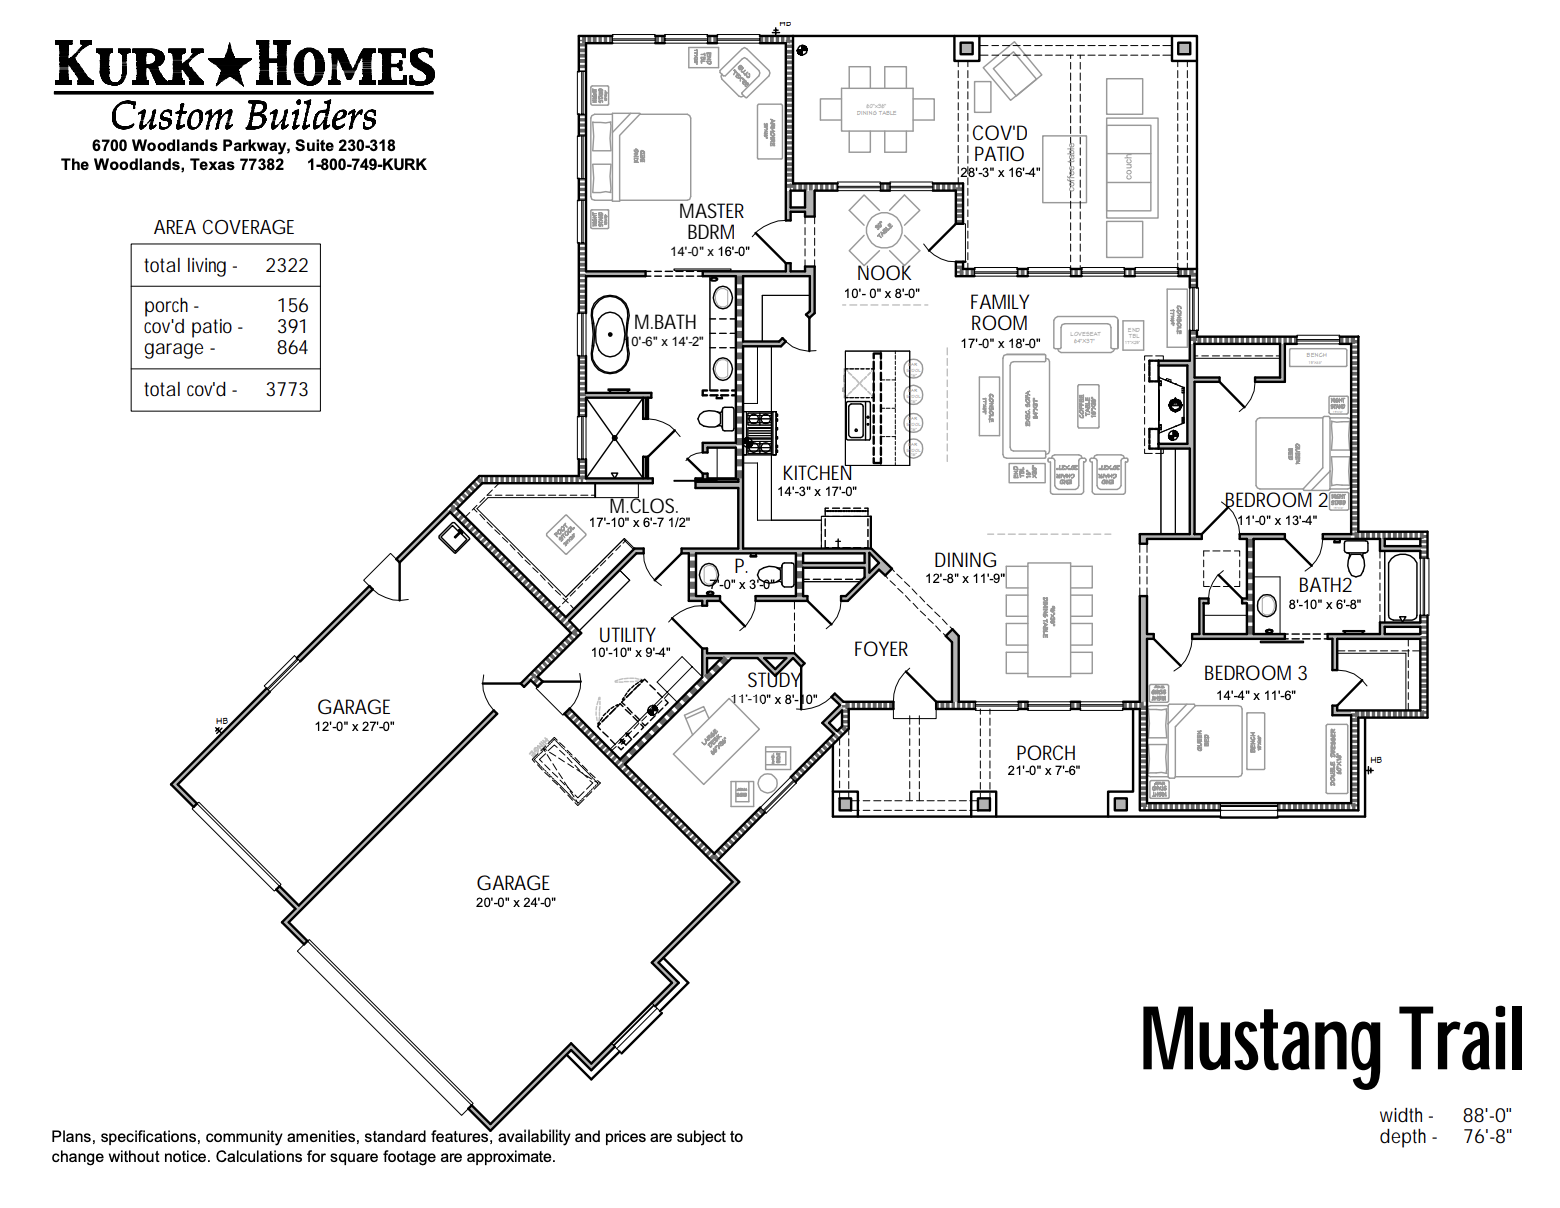 The Mustang Trail - Home Plan Design